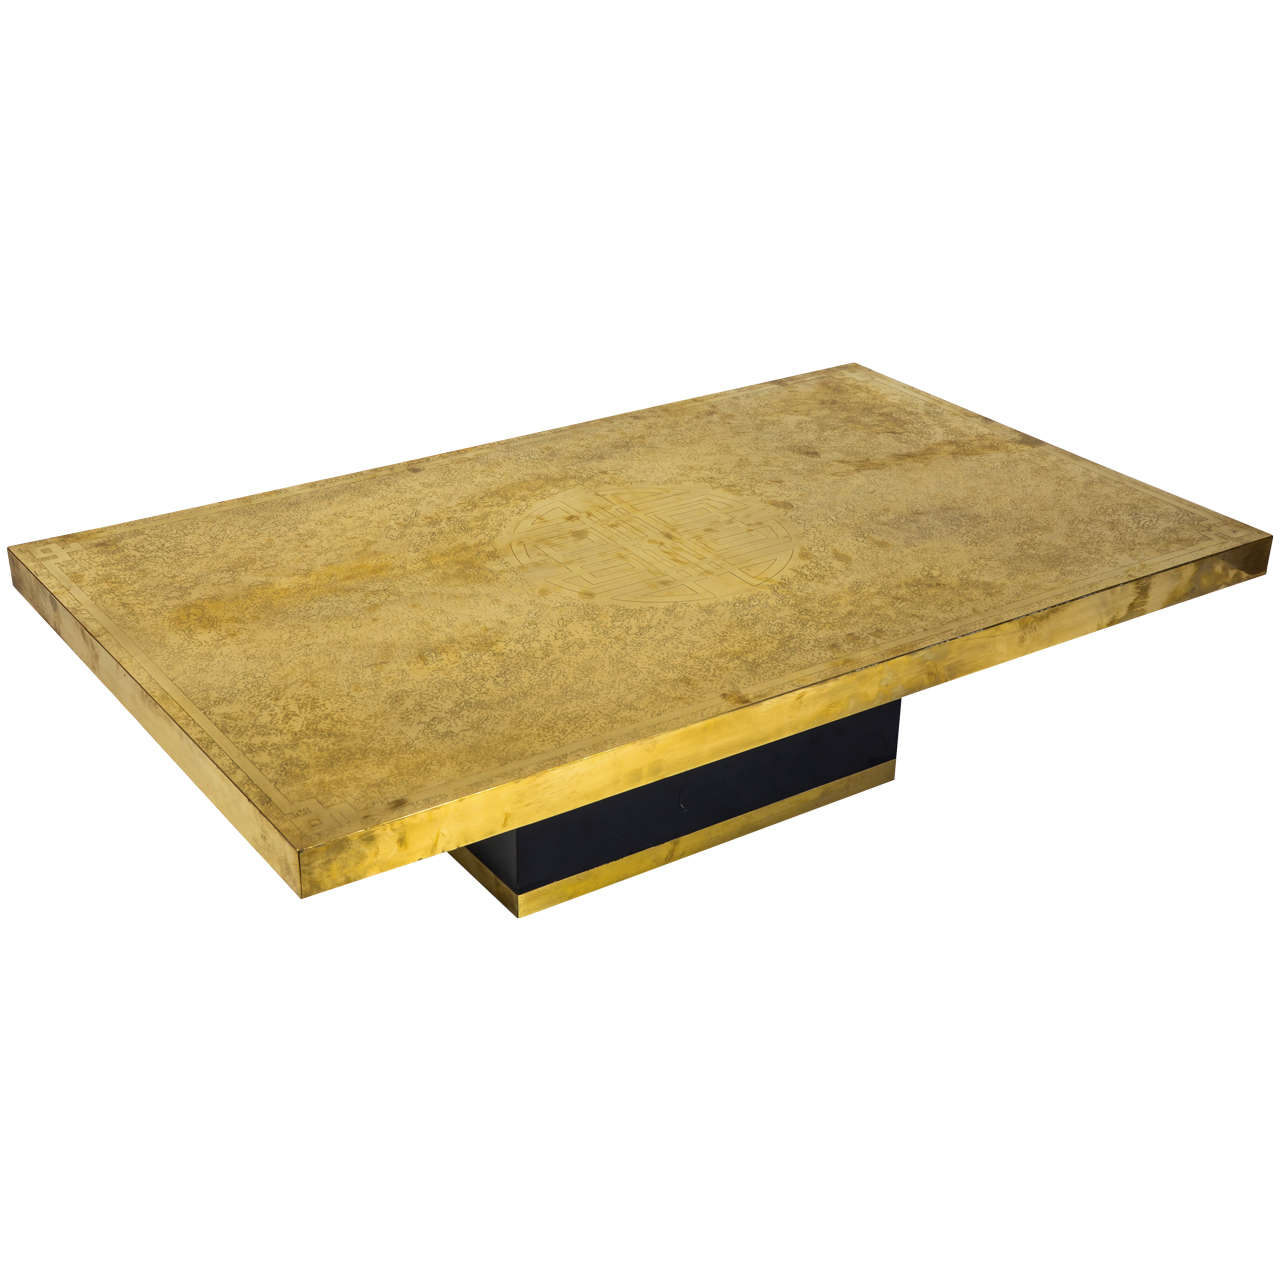 Rricco D" Coffee Table in Bronze